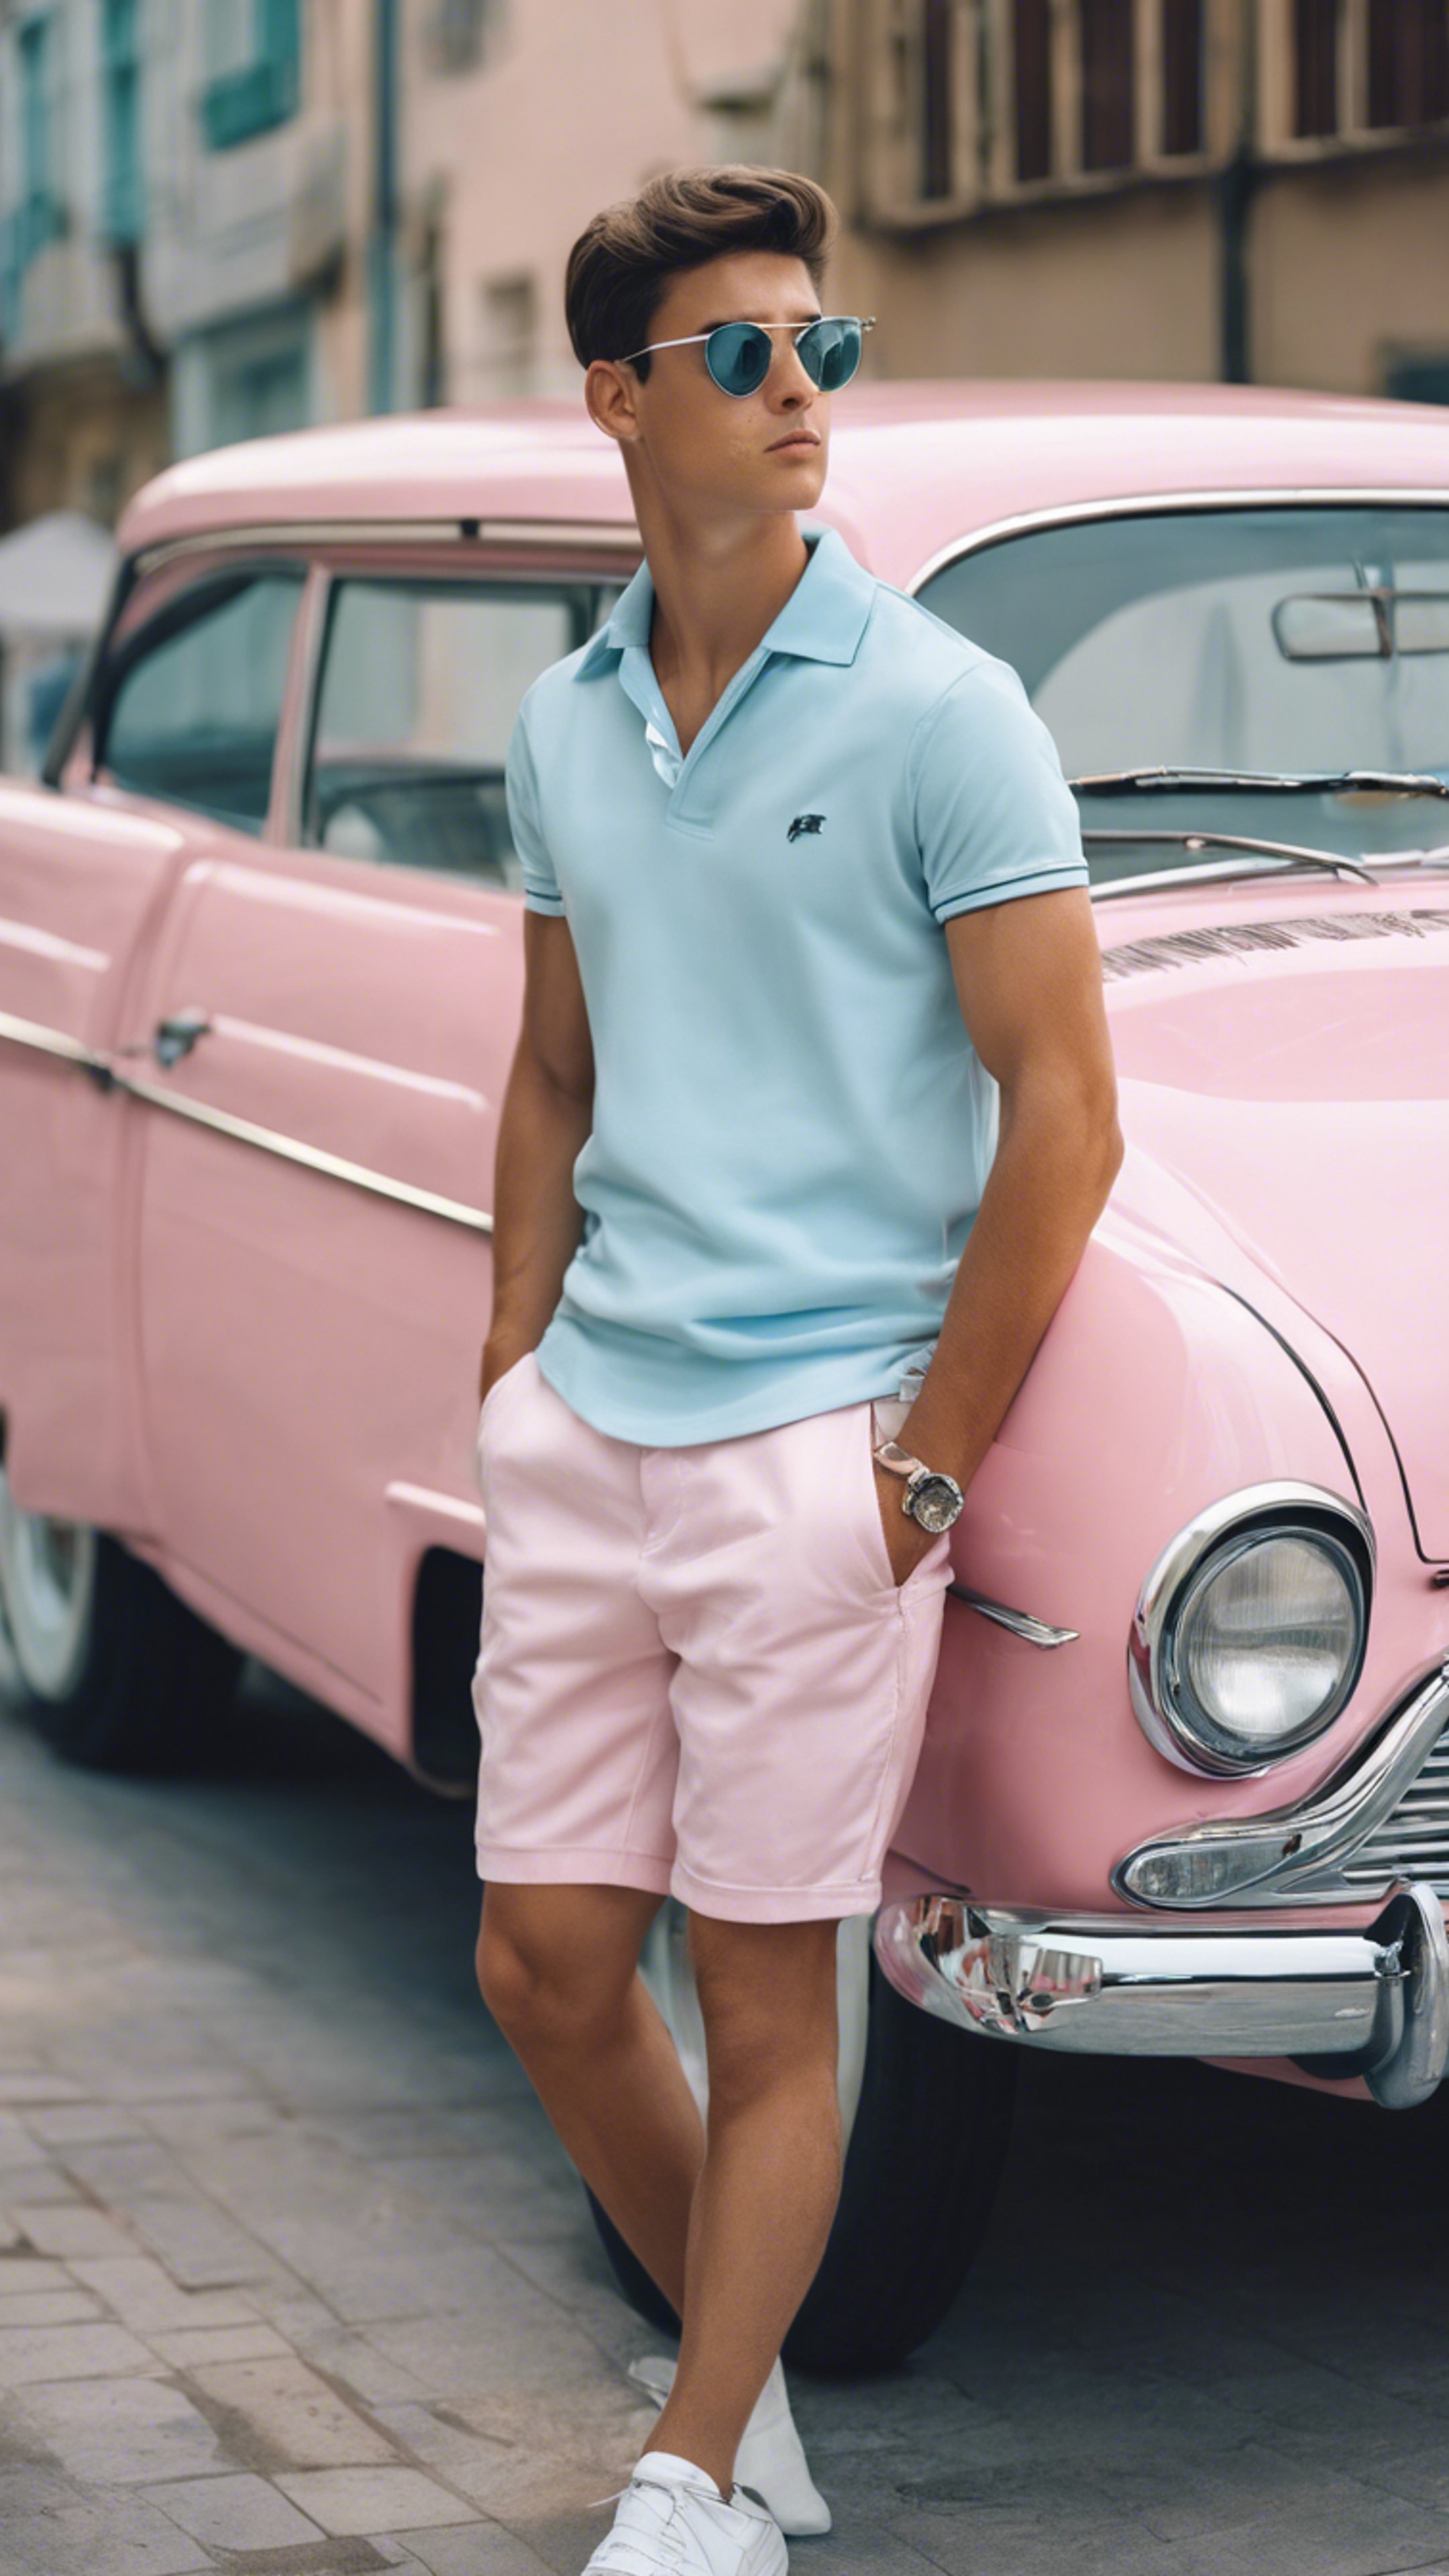 A young man in a preppy outfit of a pink polo and white shorts, leaning against a vintage pastel blue car. Wallpaper[06a1489580244fdfbfdf]